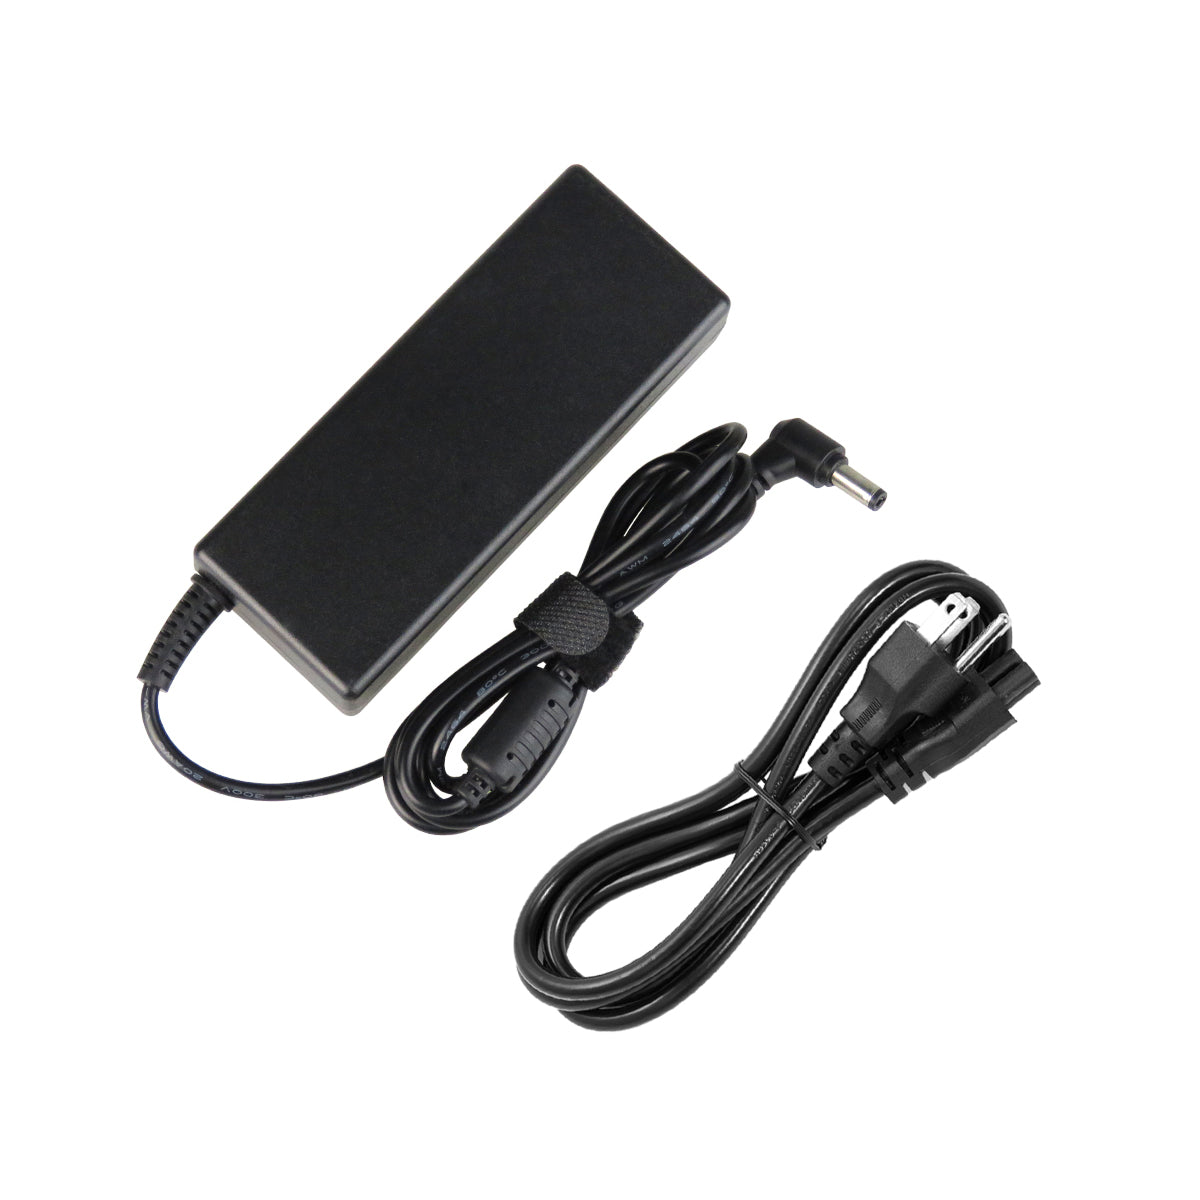 AC Adapter Charger for ASUS U56E-BBL5 Notebook.